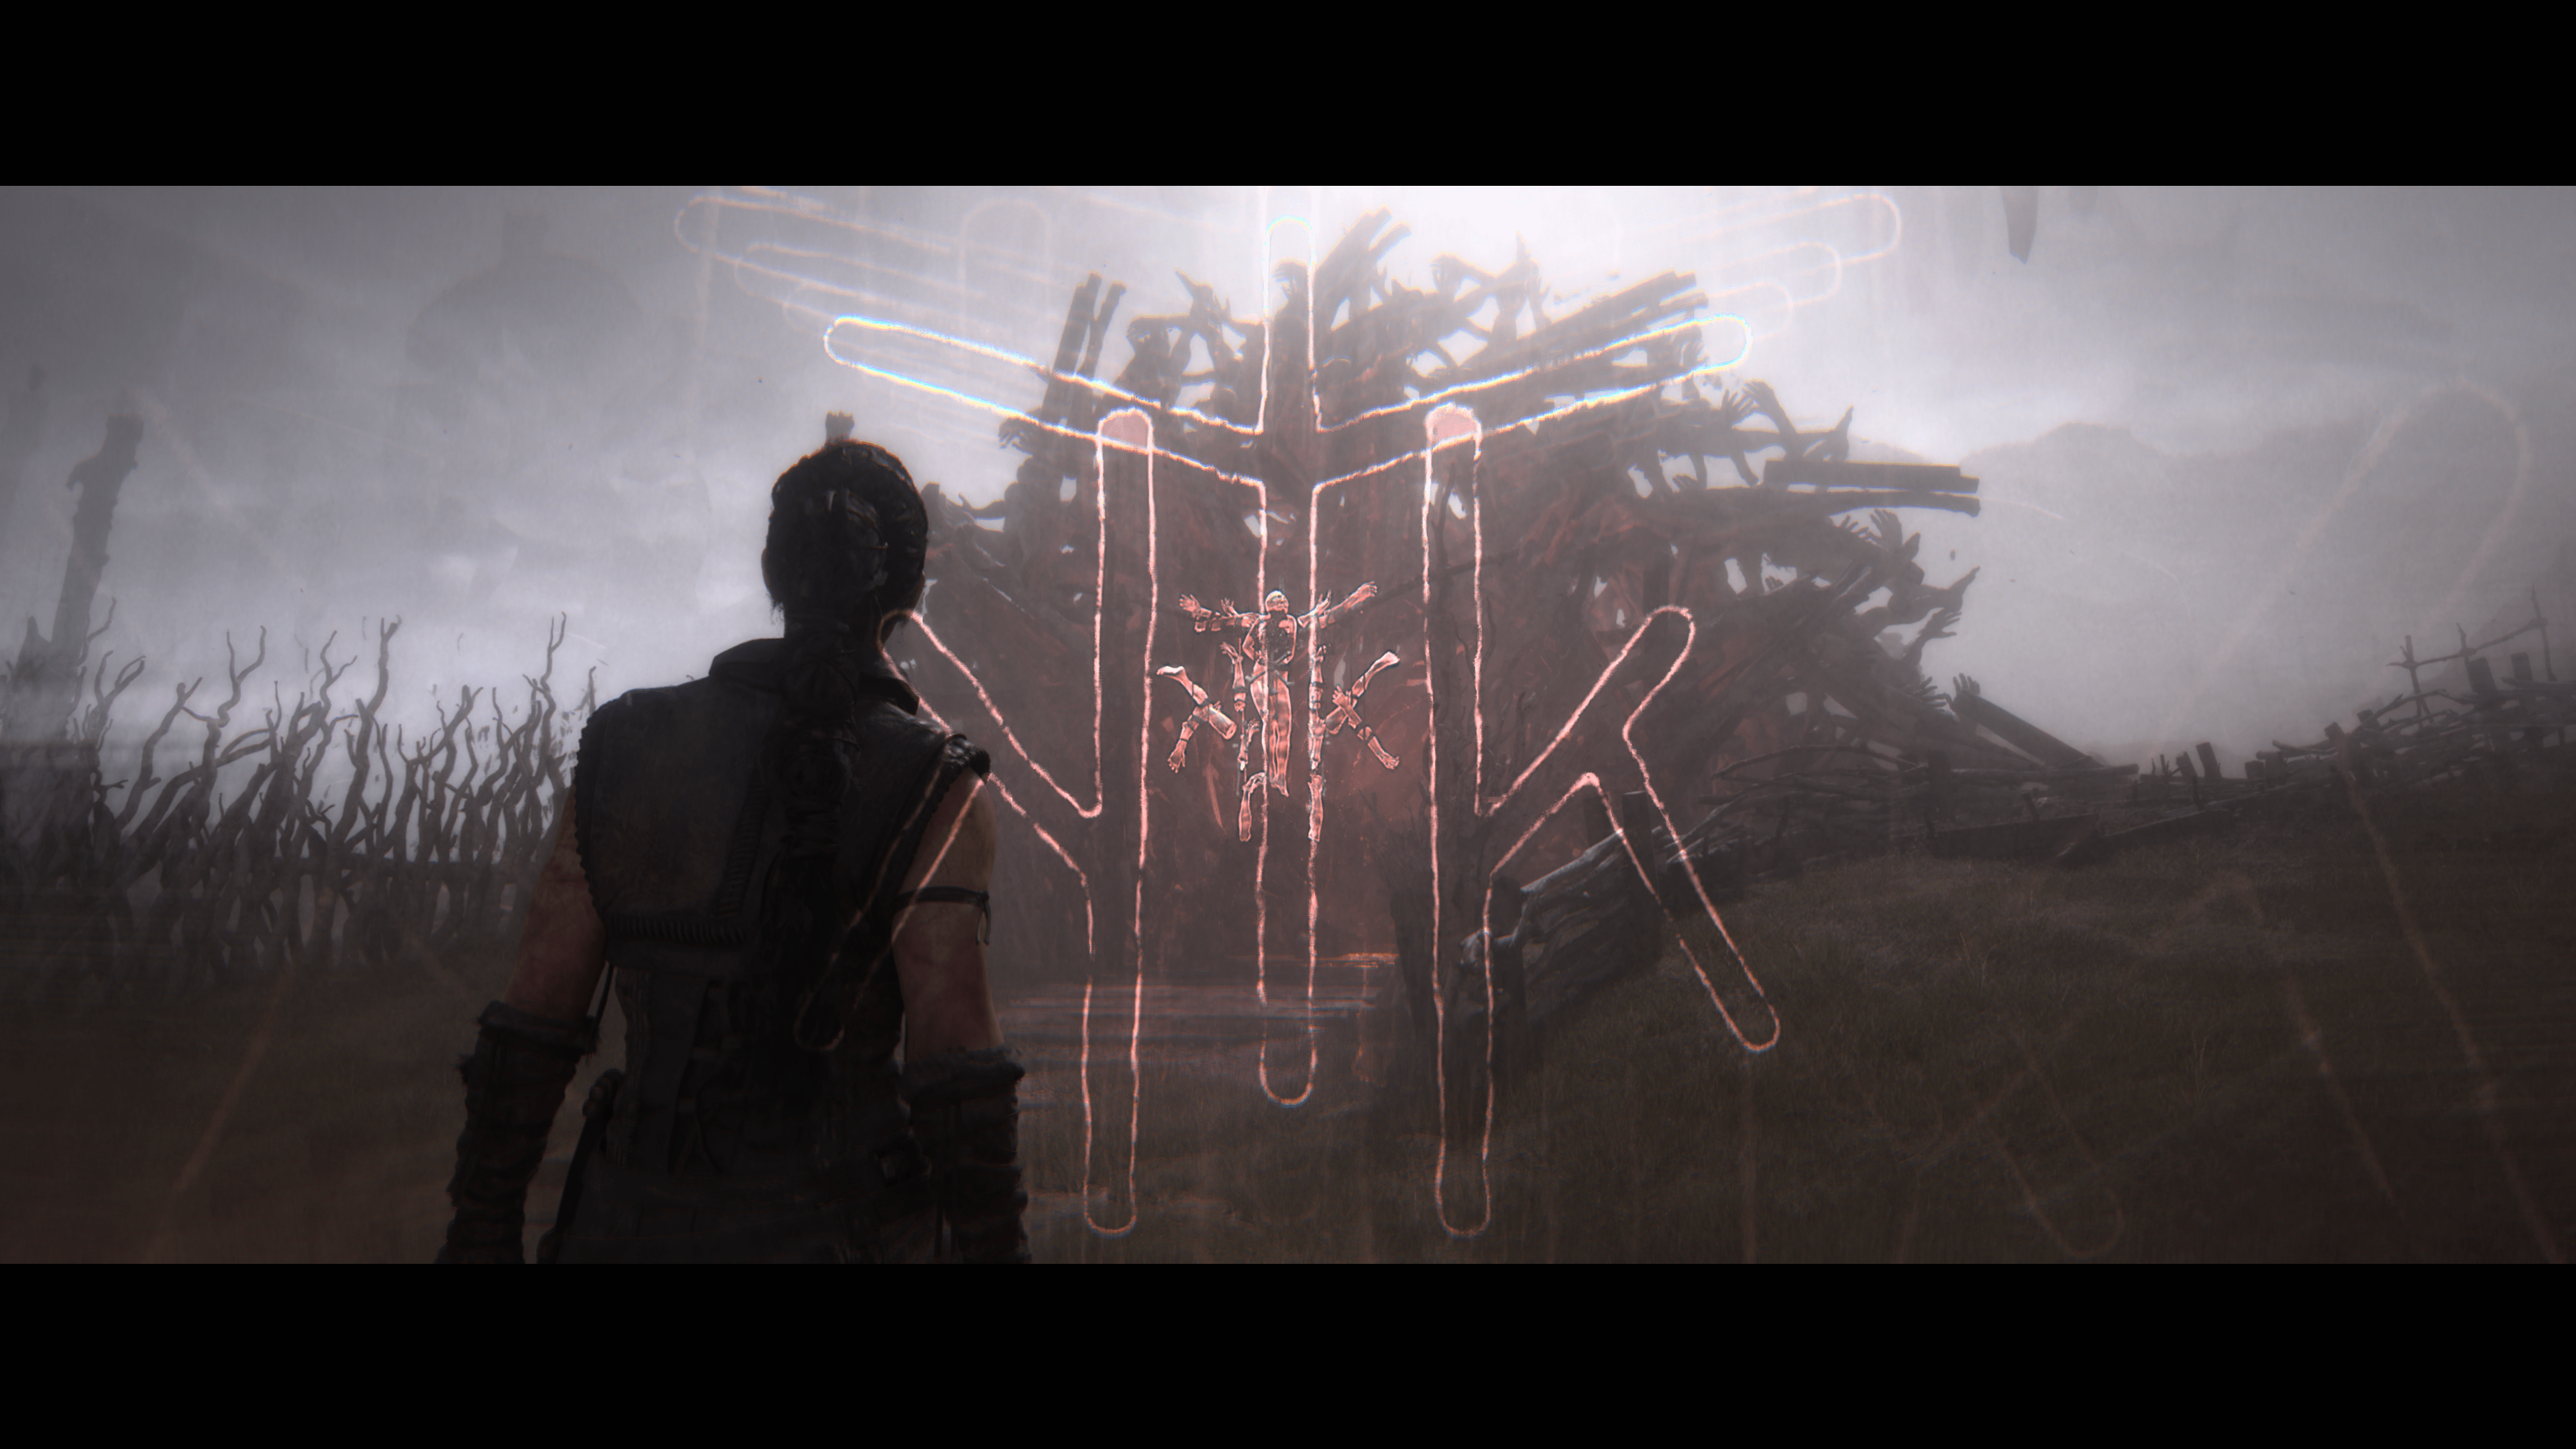 Looking from behind Senua towards a glowing symbol on an obstacle. A large outline of the same symbol is shown in the foreground.